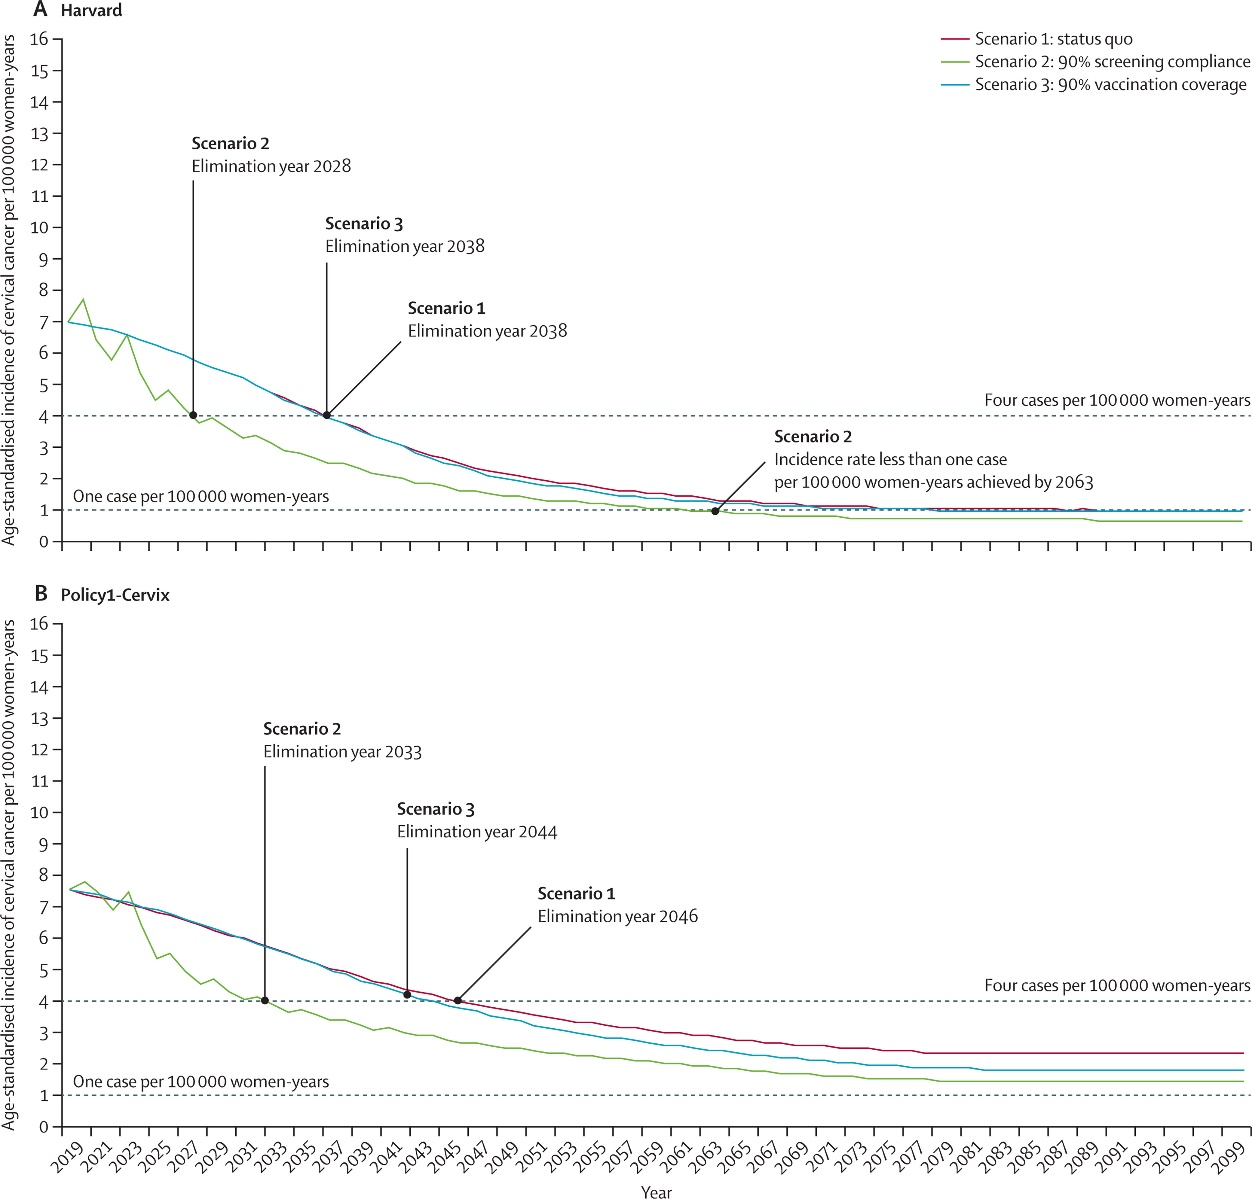 These figures display the age-standardized incidence of cervical cancer per 100,000 women-years by years for three modeled elimination scenarios.  The top figure displays results from the Harvard model and the bottom figure displays results from the Policy-1 model.  The red line marks the status quo scenario, the green line marks the 90% screening compliance results, and the blue line marks 90% vaccination coverage results.